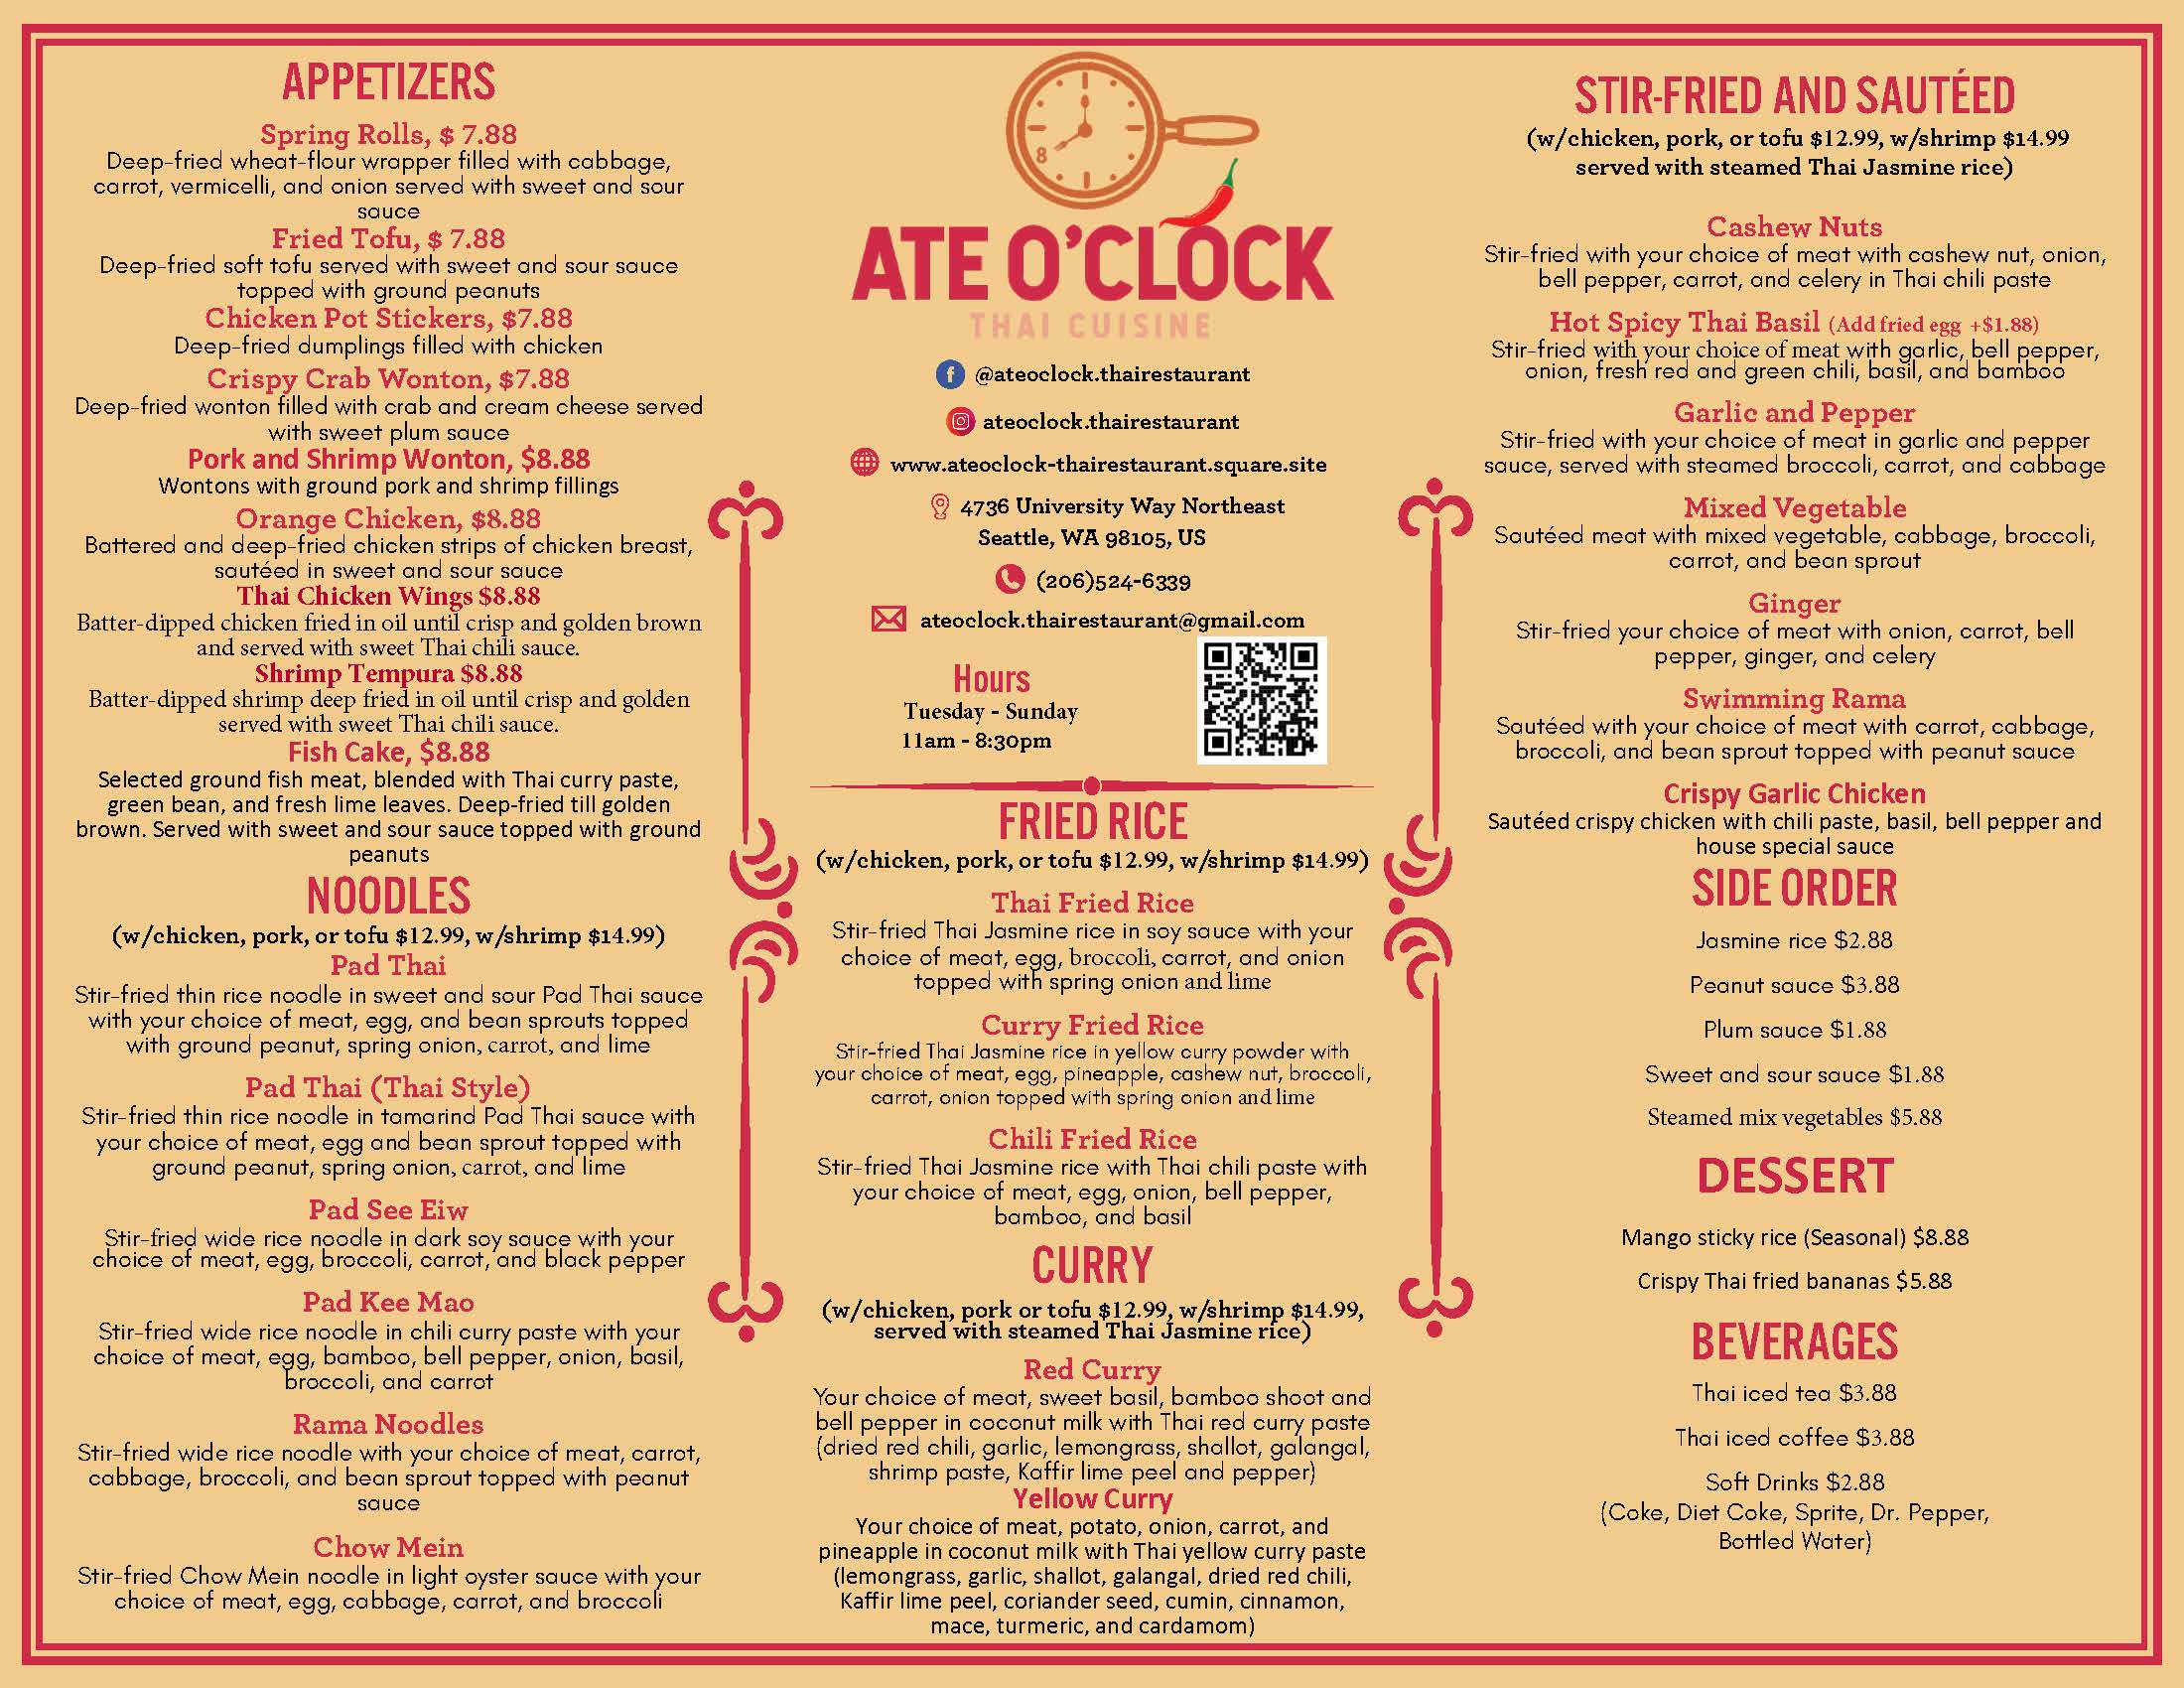 BREADS, CAKES, COOKIES & MORE: CAKE O'CLOCK'S MENU HAS EVERYTHING! – Now  Lucknow